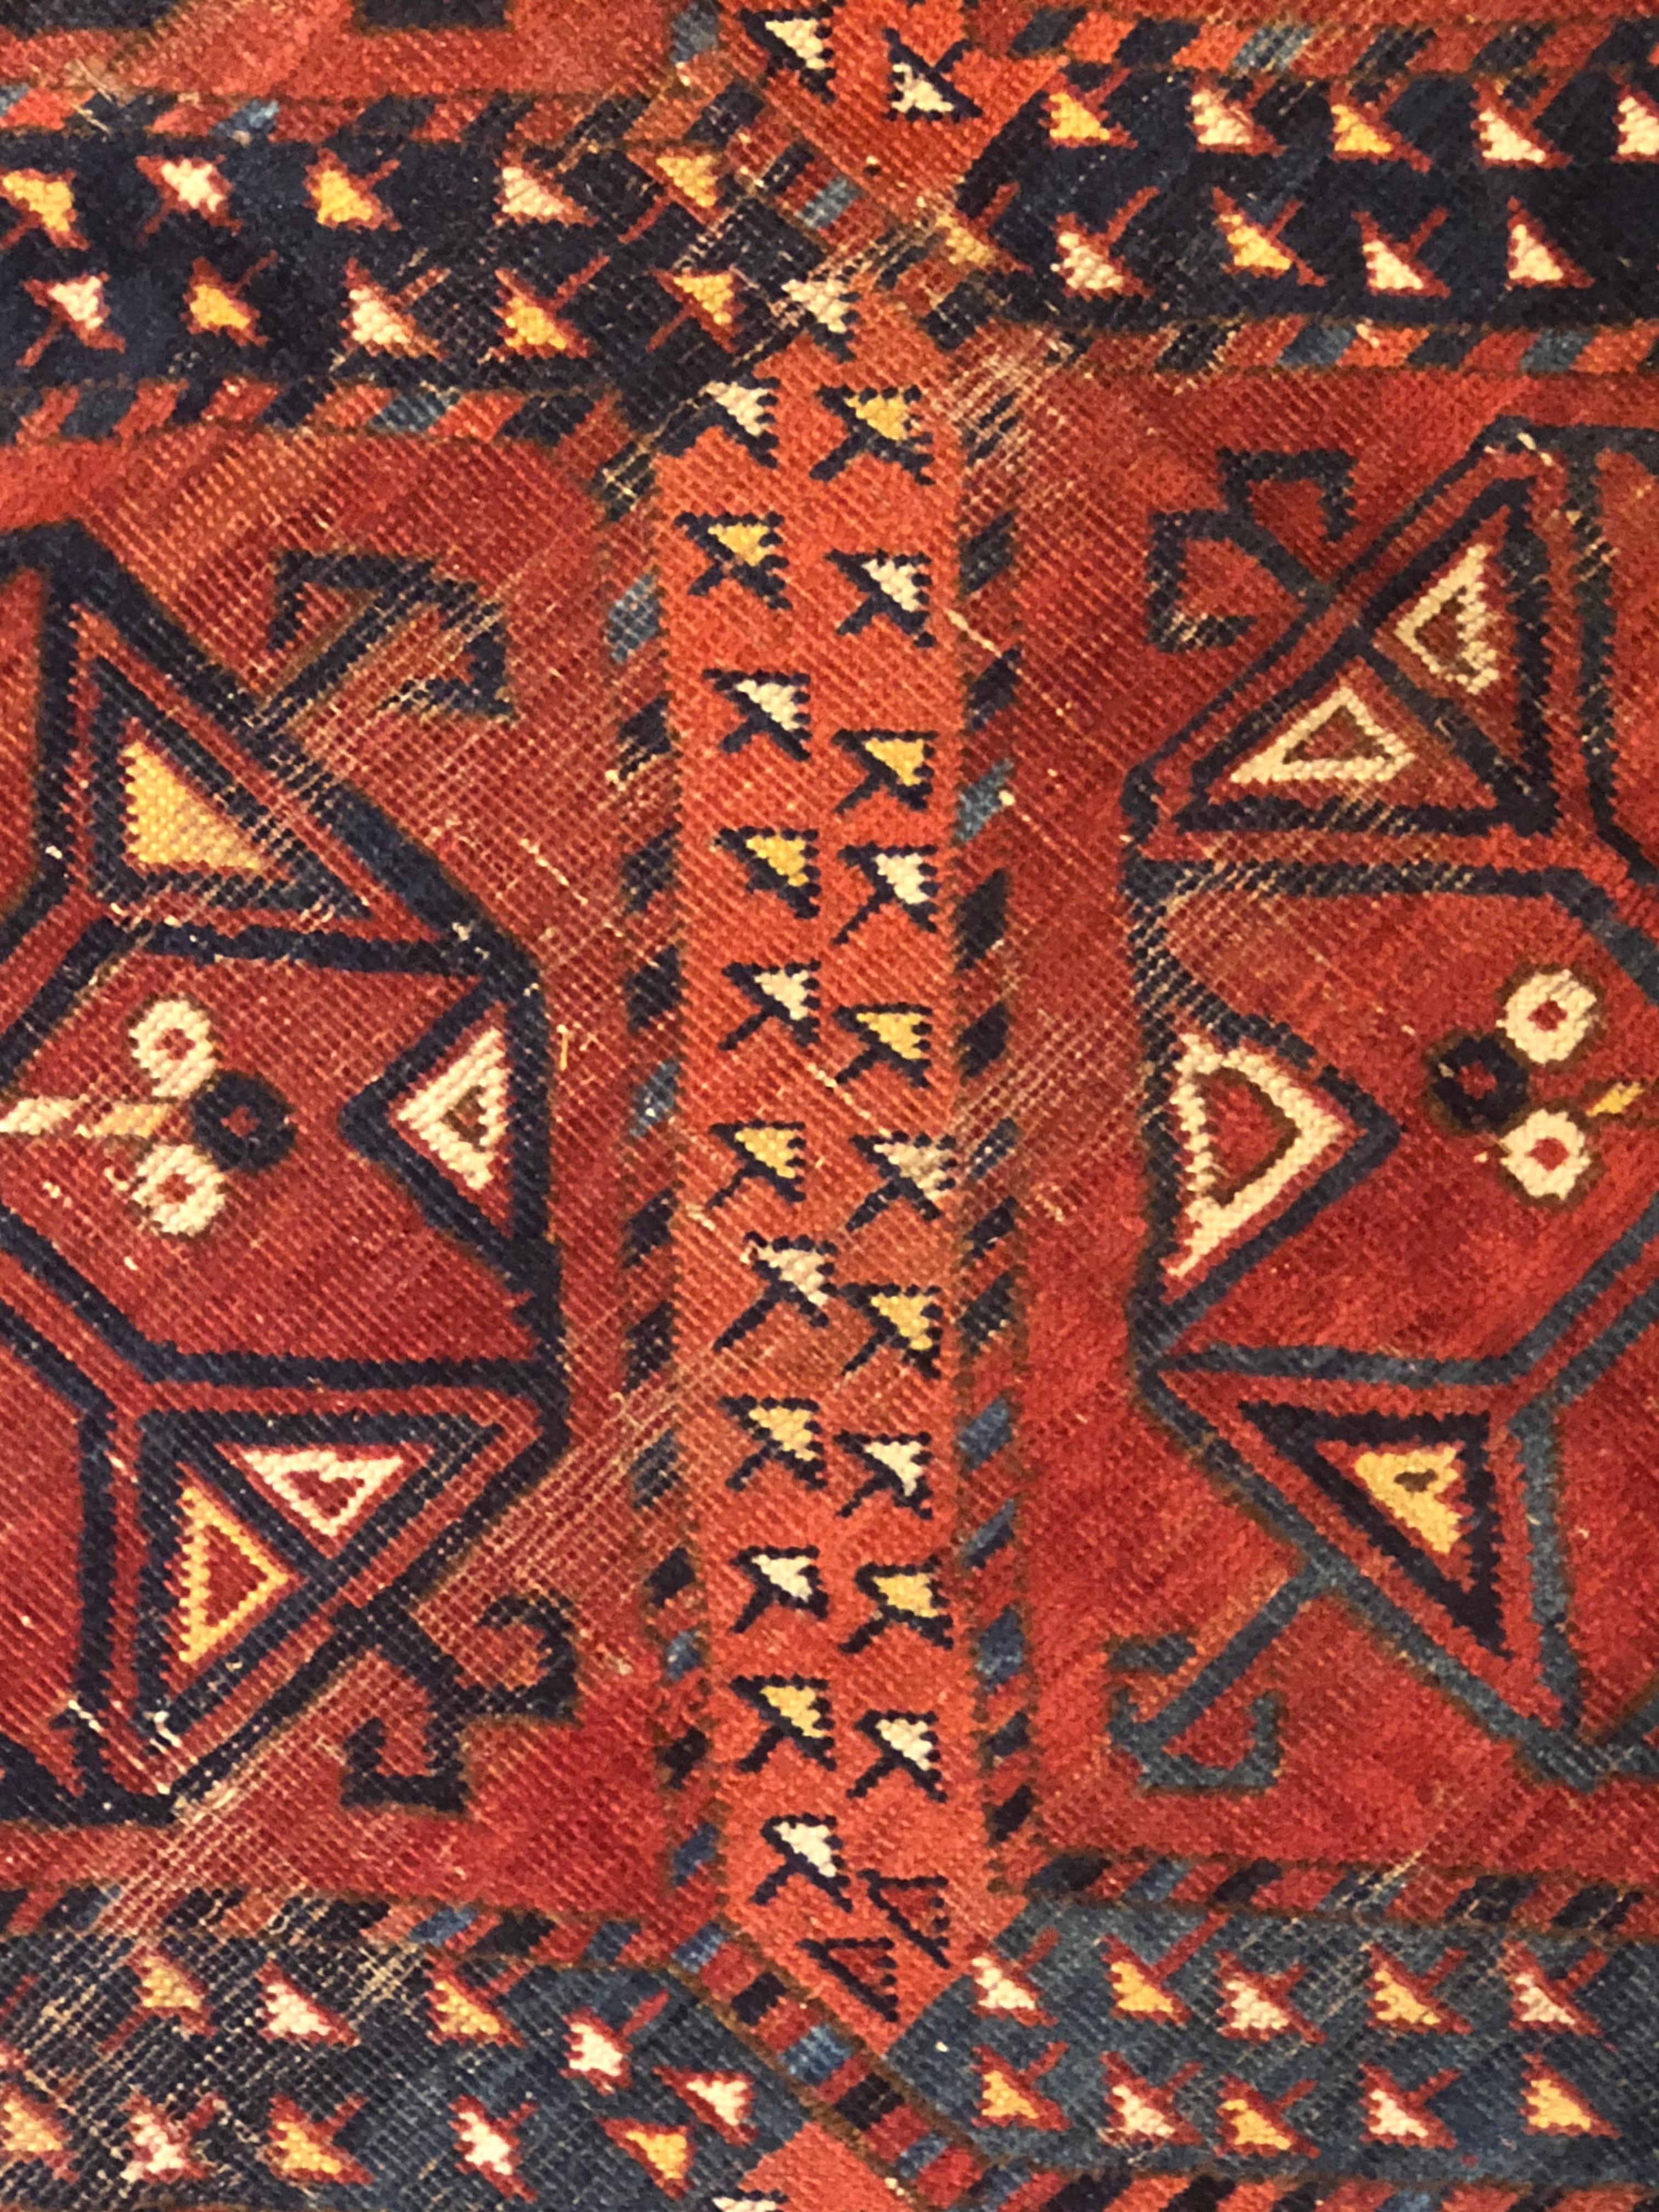 19th Century Red Blue White Geometric Archaic Polygonal Turkmen Rug, about 1870 For Sale 11